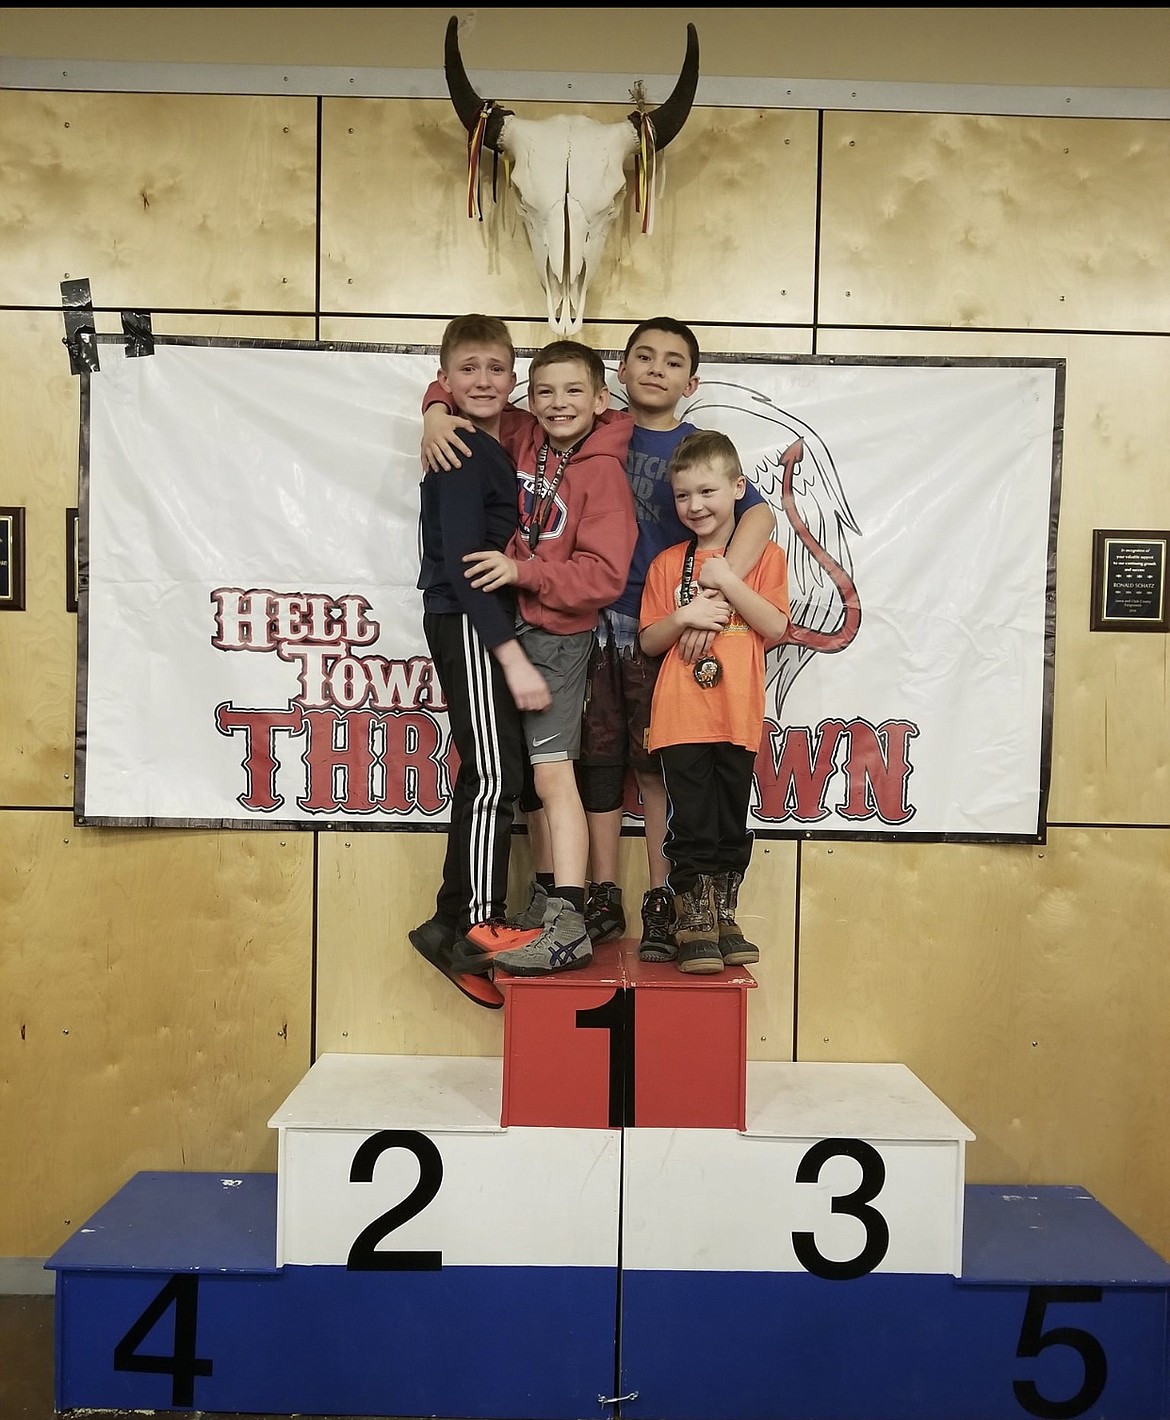 Courtesy photo
Team Real Life wrestlers traveled to Helena, Mont., to participate in the Helltown Throwdown tournament Jan. 12, joining nearly 600 wrestlers. From left are Trey Smith; Rider Seguine, 2nd; Diesel Thompson, 1st; and Keegan Anderson, 5th.